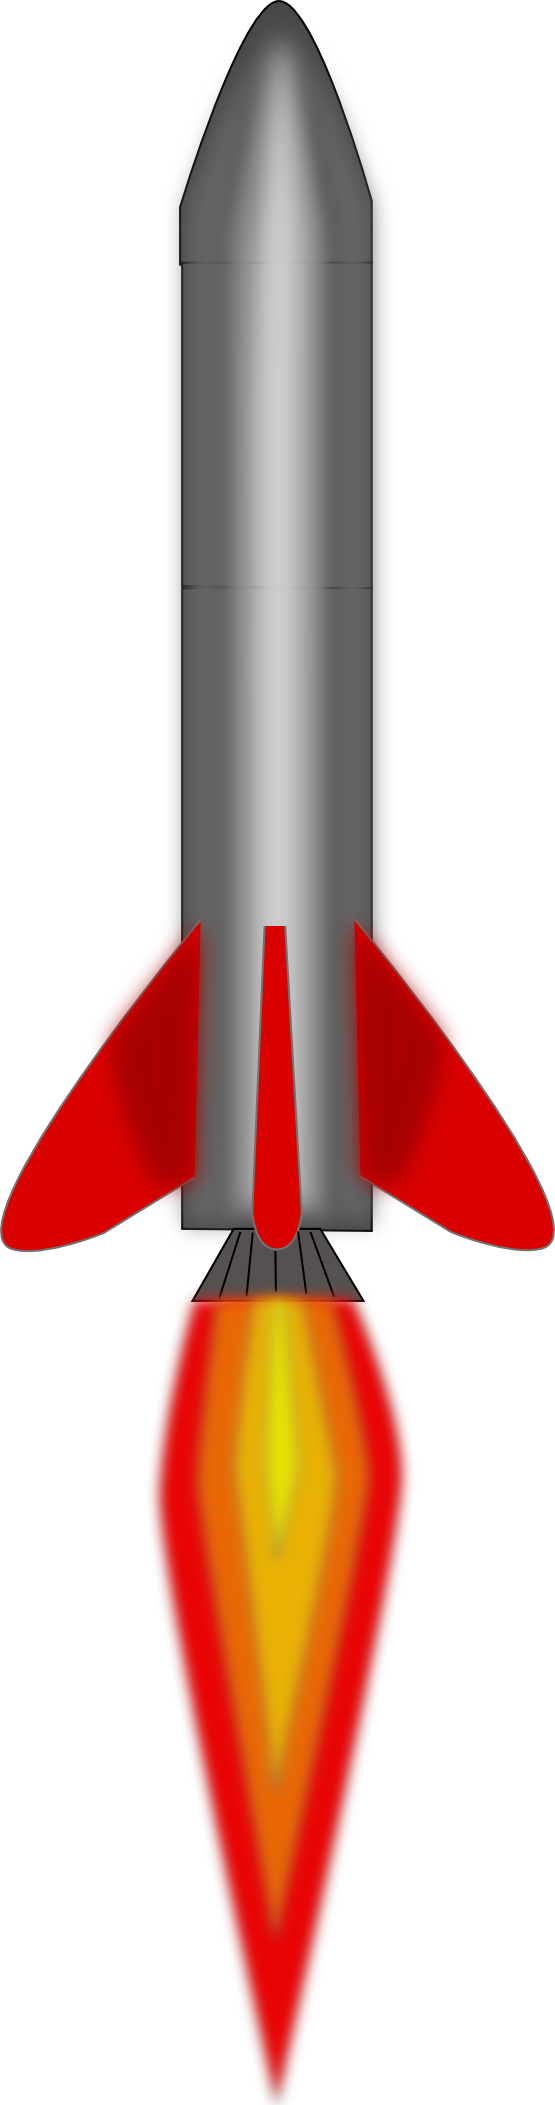 This Free Missile Clip Art Is Brought To You Courtesy Of Our Friends